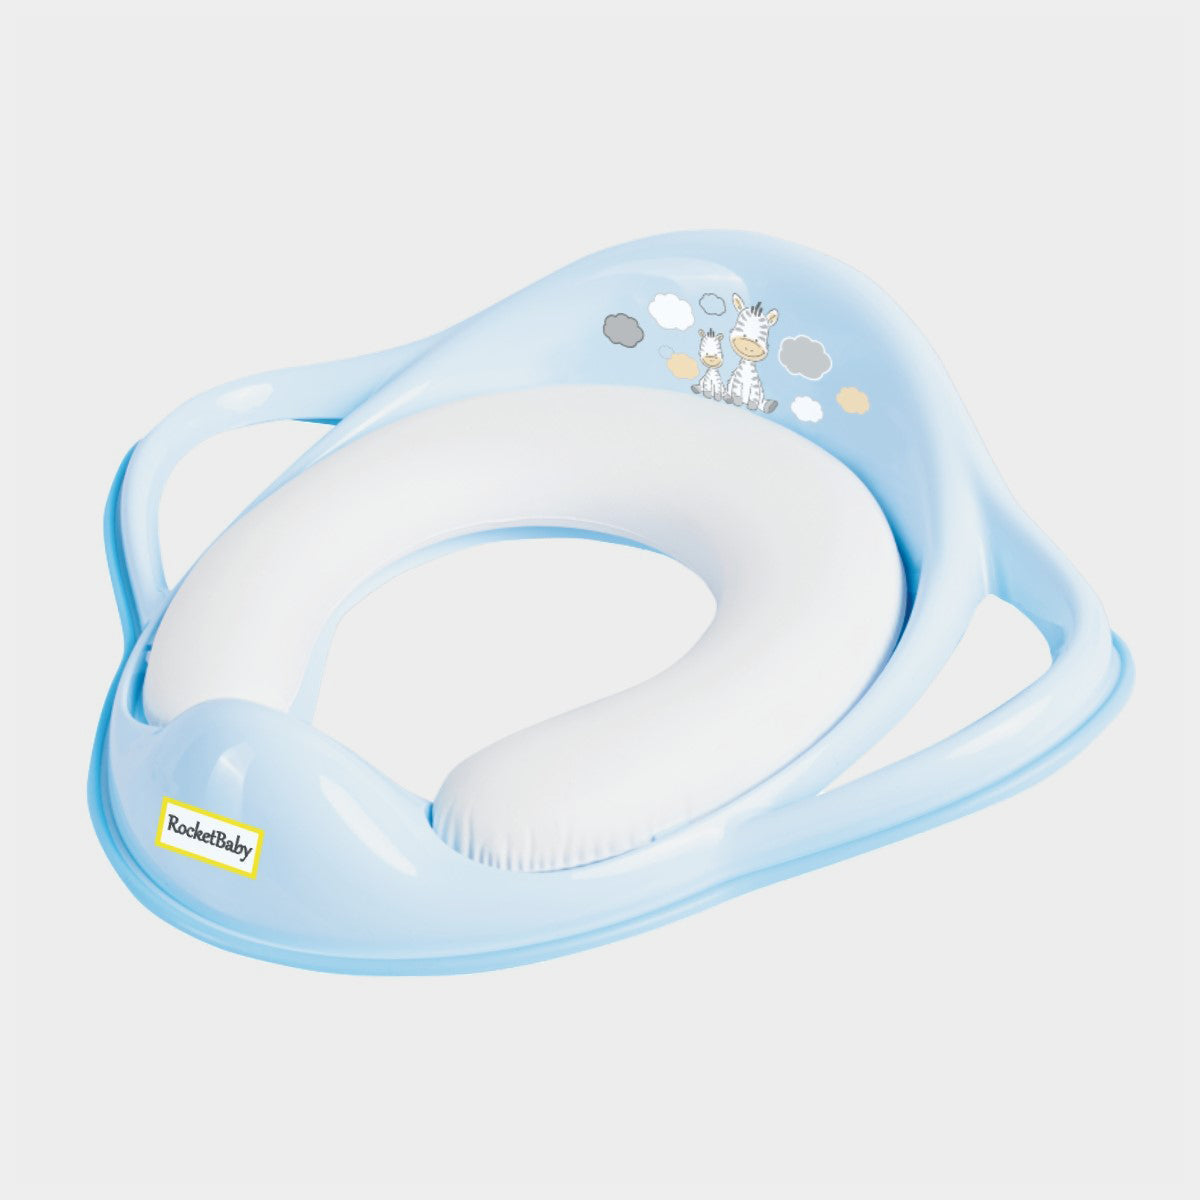 Potty Training Seat with Handles Light Blue